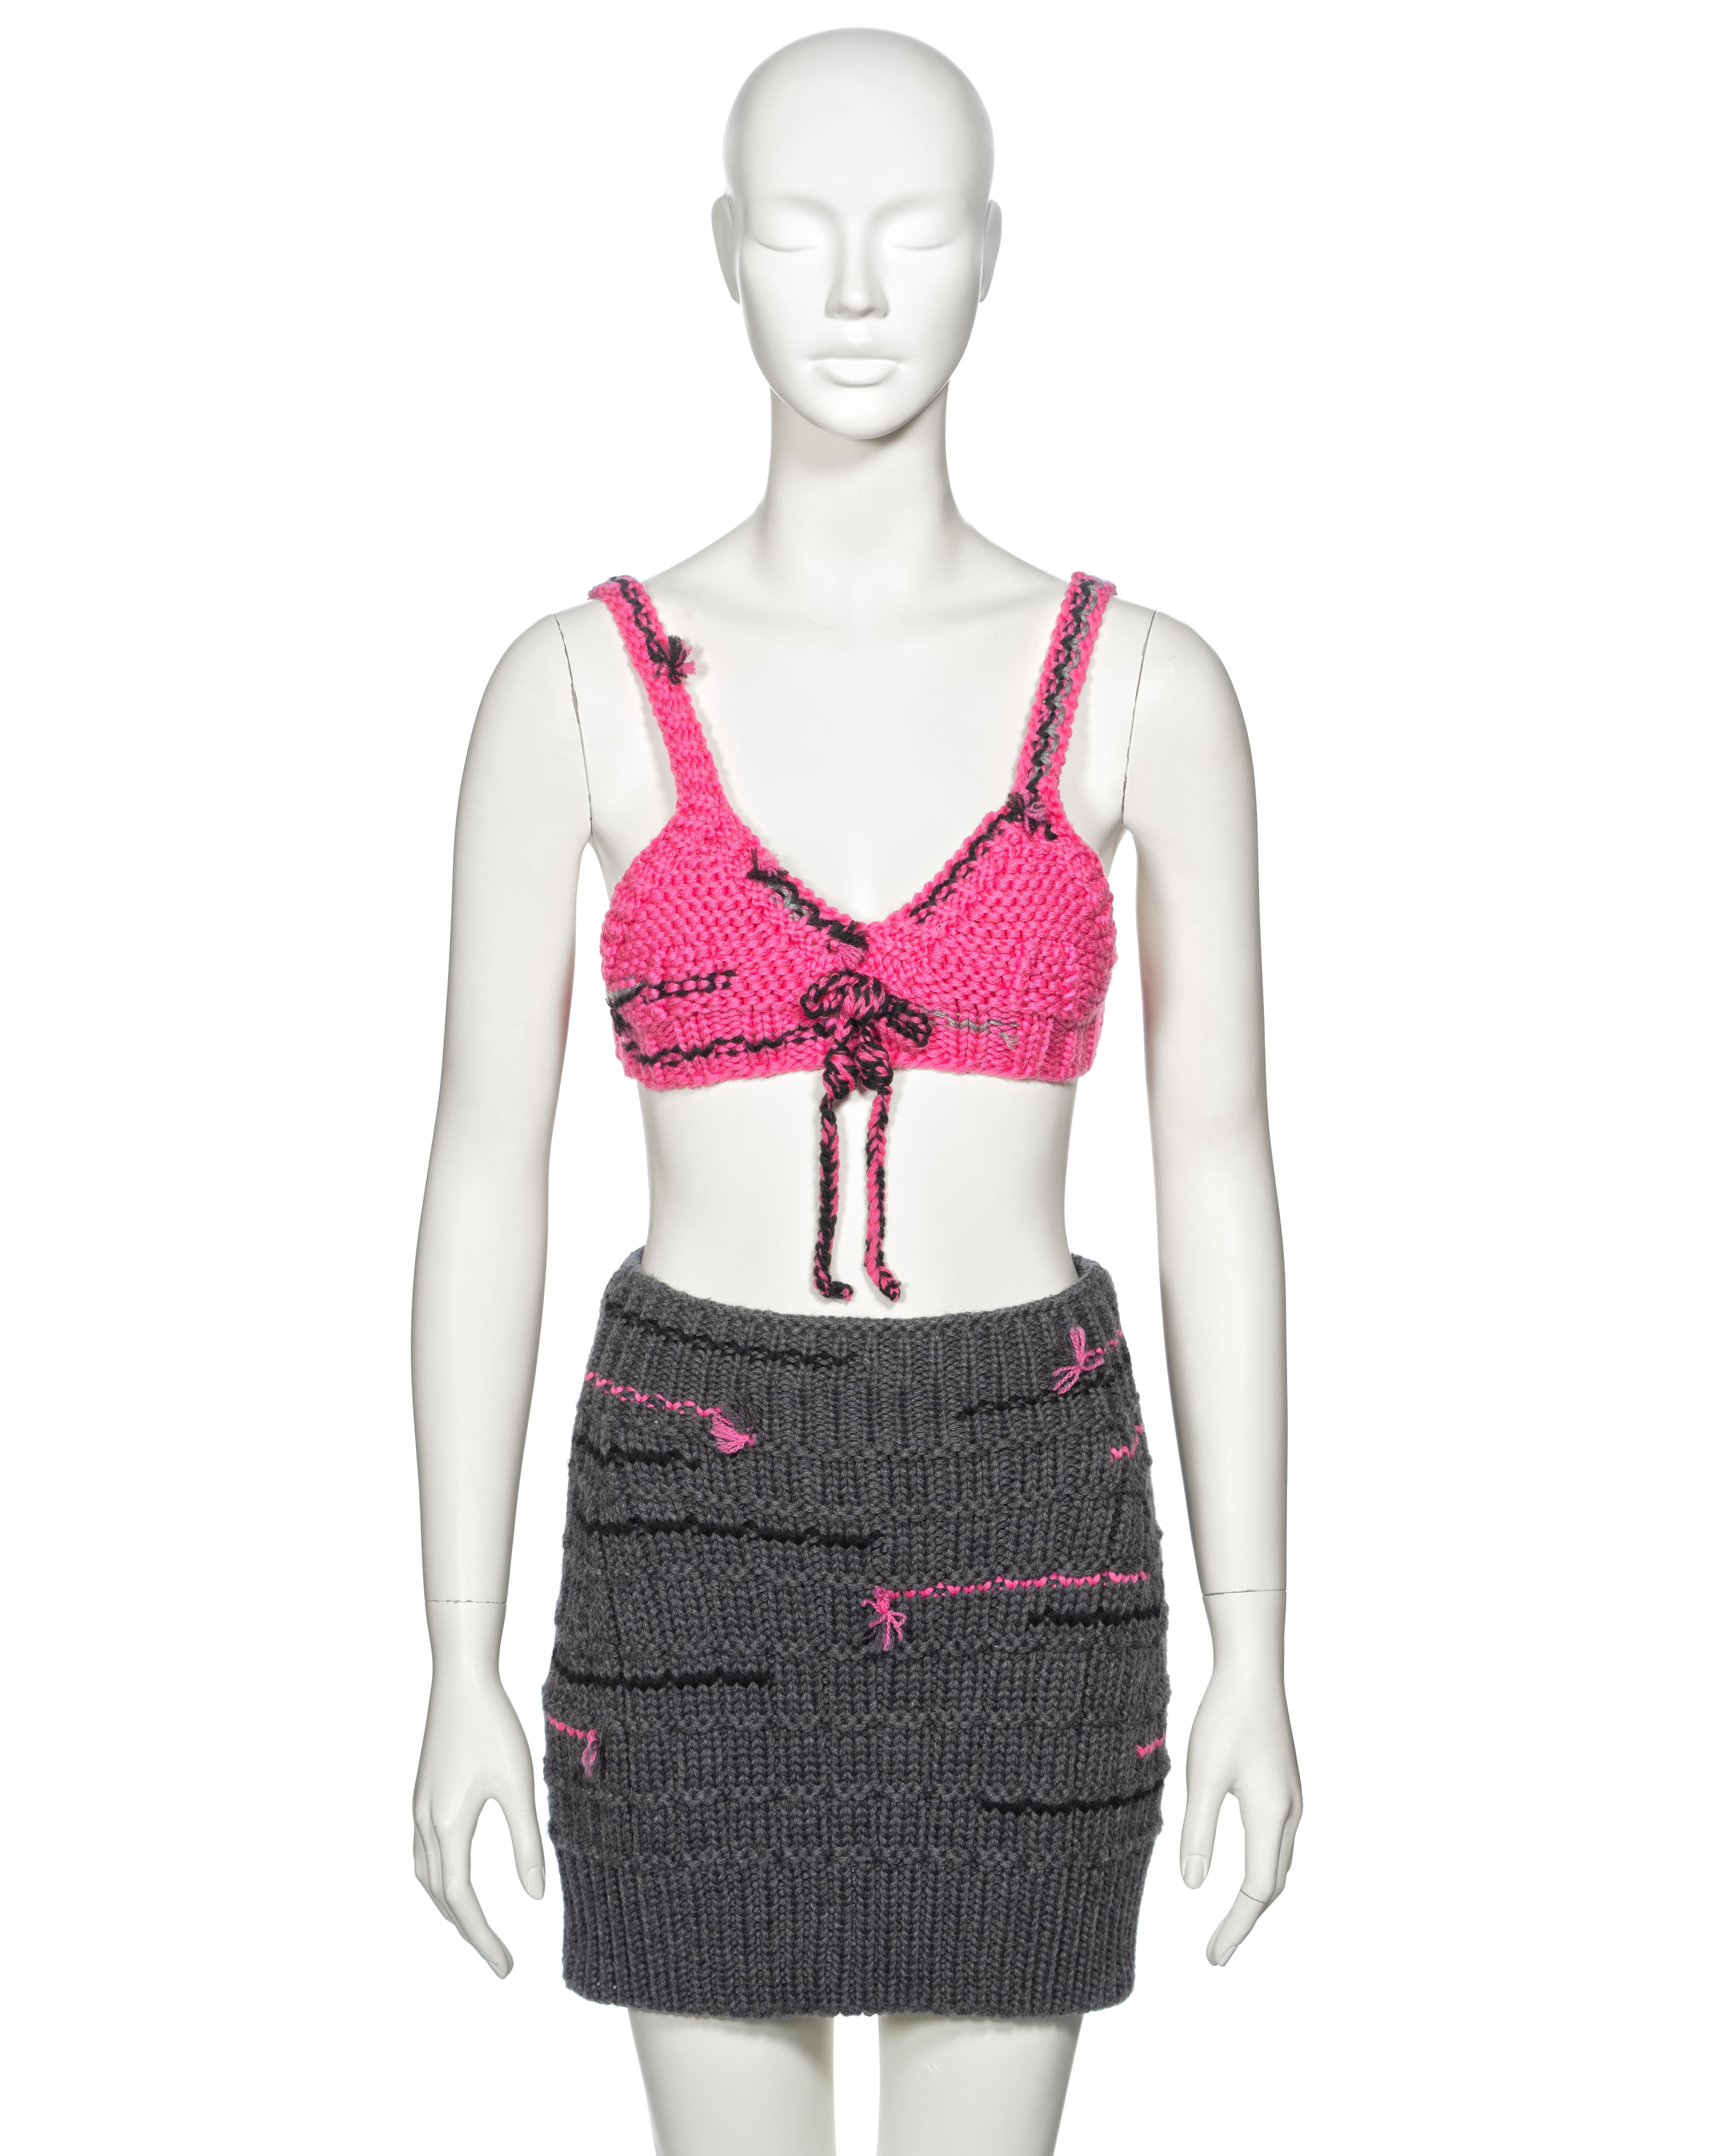 ▪ Prada Knitted Bra and Skirt Set
▪ Creative Director: Miuccia Prada
▪ Fall-Winter 2017
▪ Sold by One of a Kind Archive
▪ Pink knitted bra top 
▪ Snap button closures
▪ Grey knitted mini skirt 
▪ Fabric: 100% Pure New Wool
▪ Top: IT40 - FR36 - UK8 -